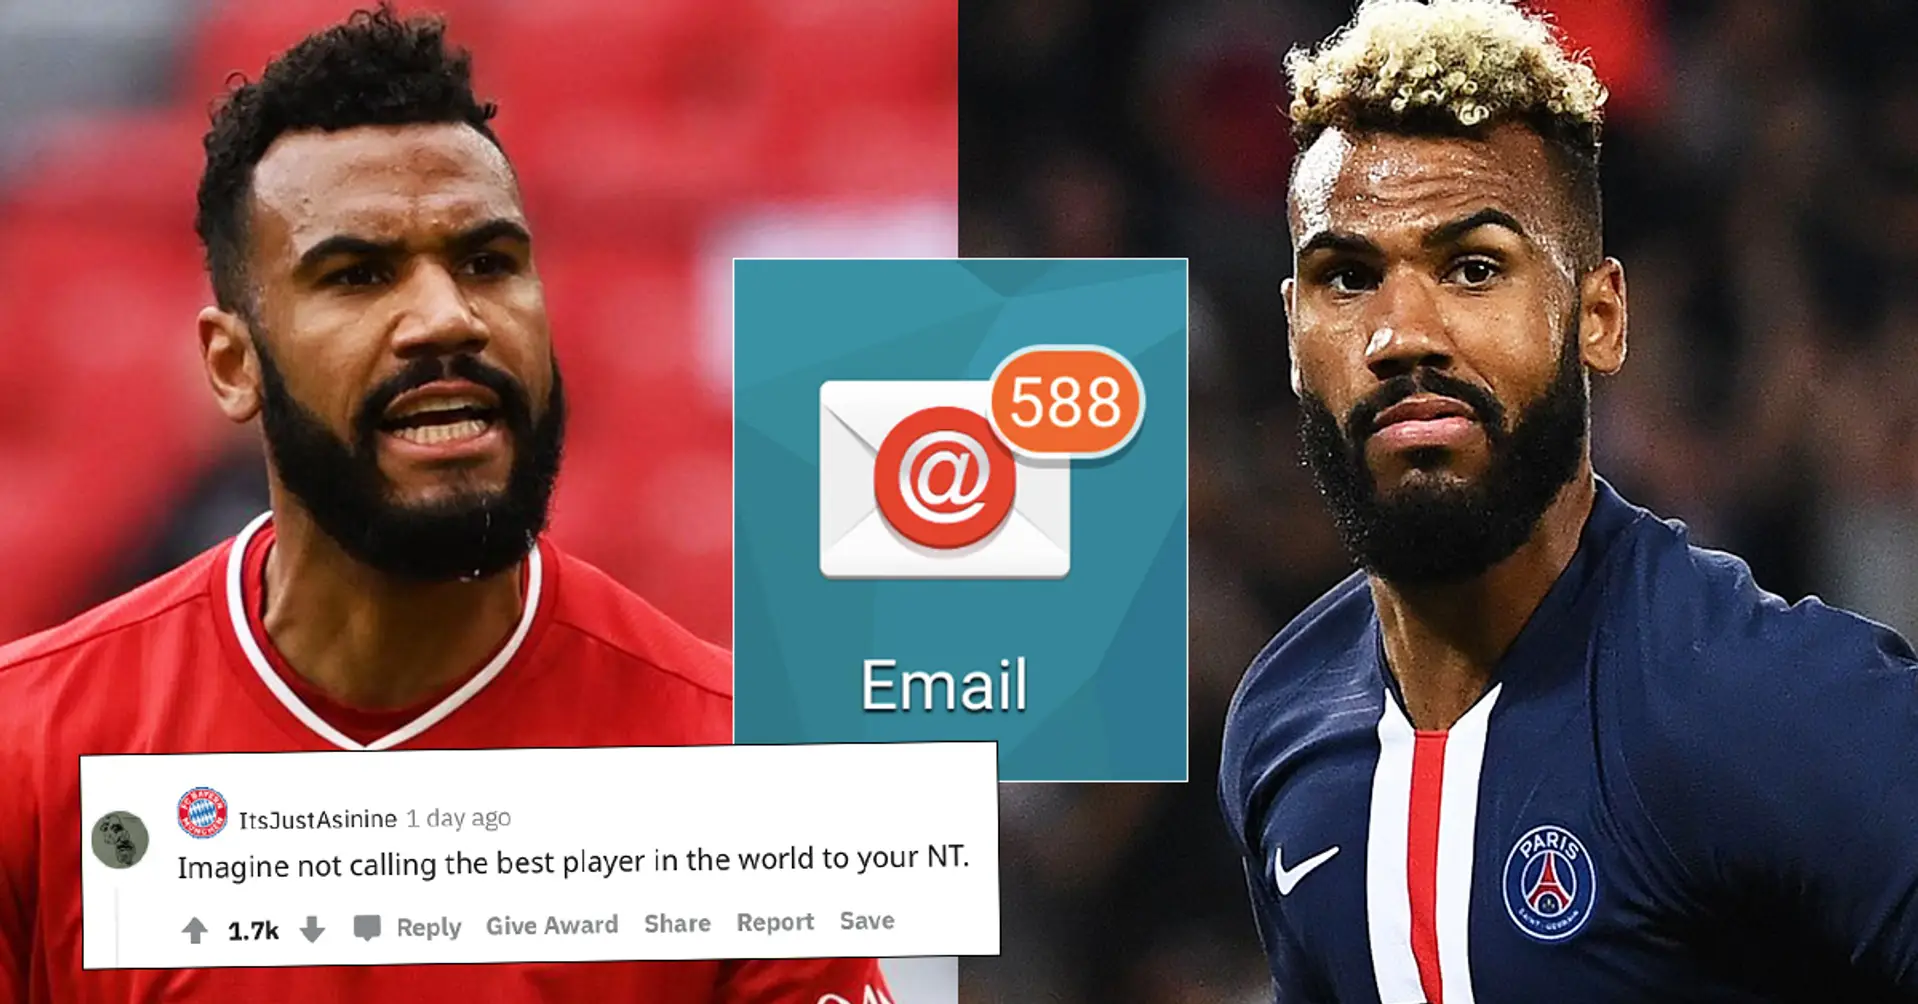 Choupo-Moting out of Cameroon squad cause Federation sent an email to itself instead of him